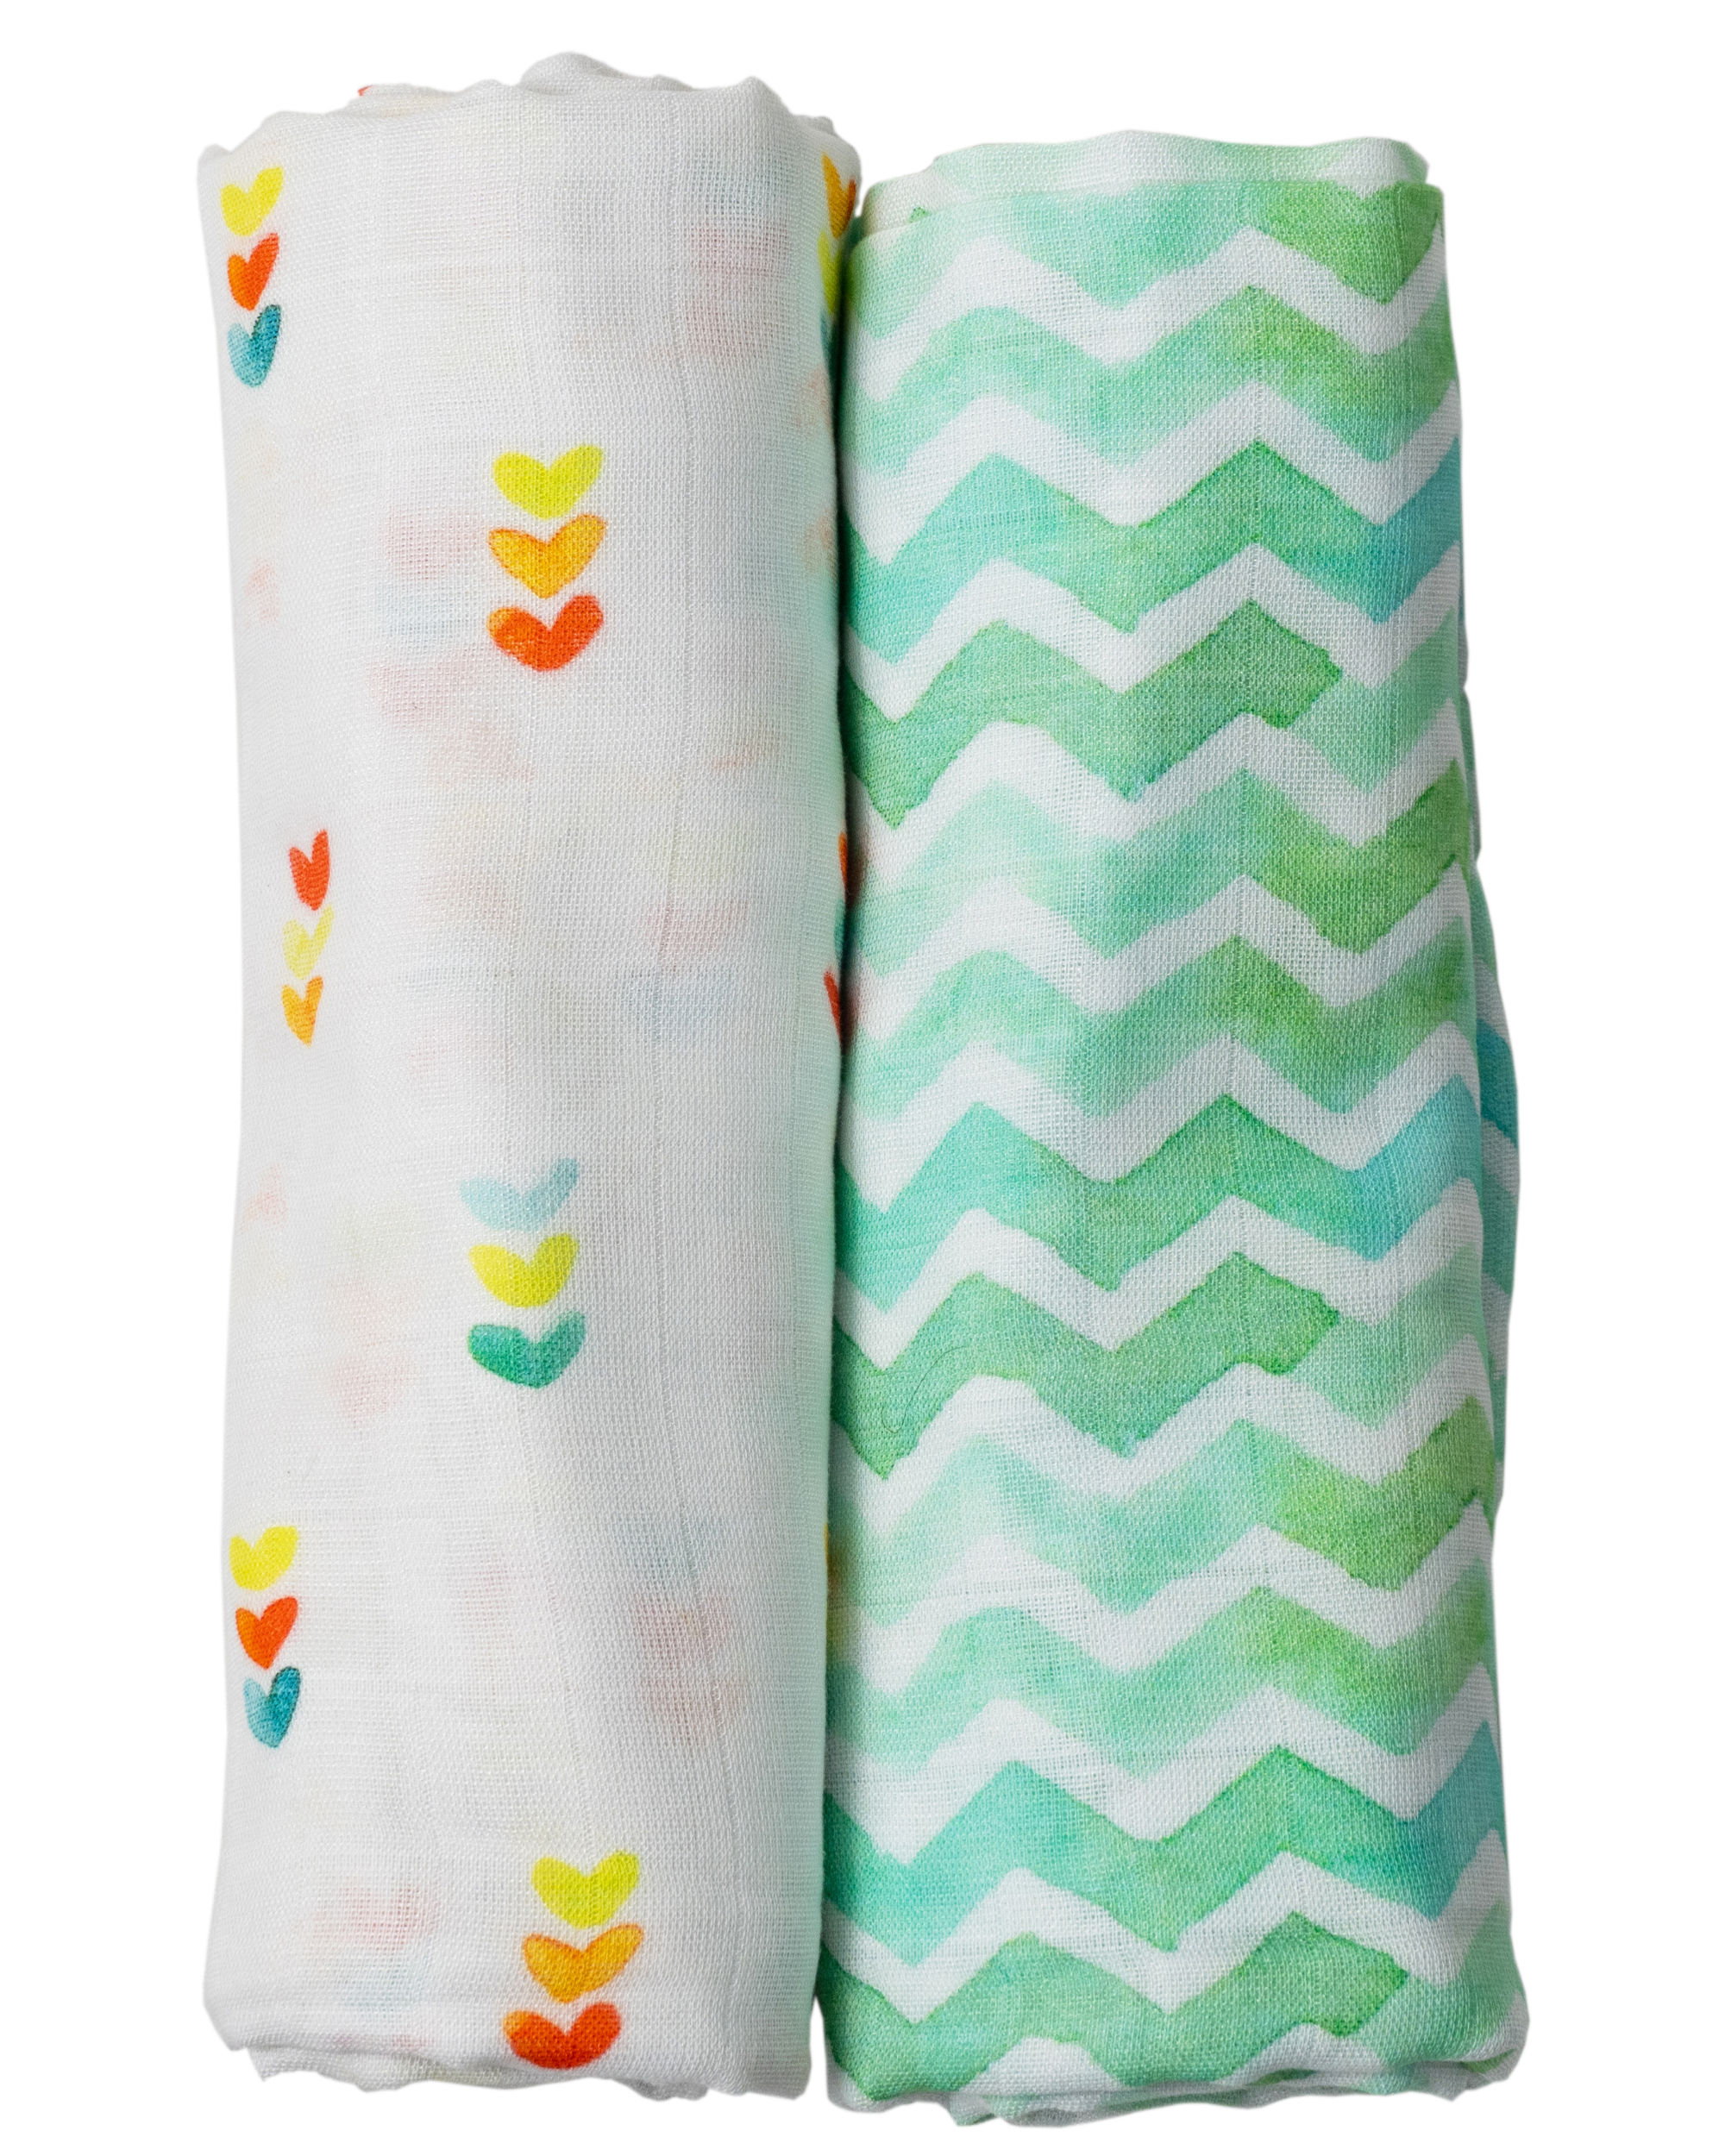 White and sea green muslin multipurpose baby swaddle - set of two